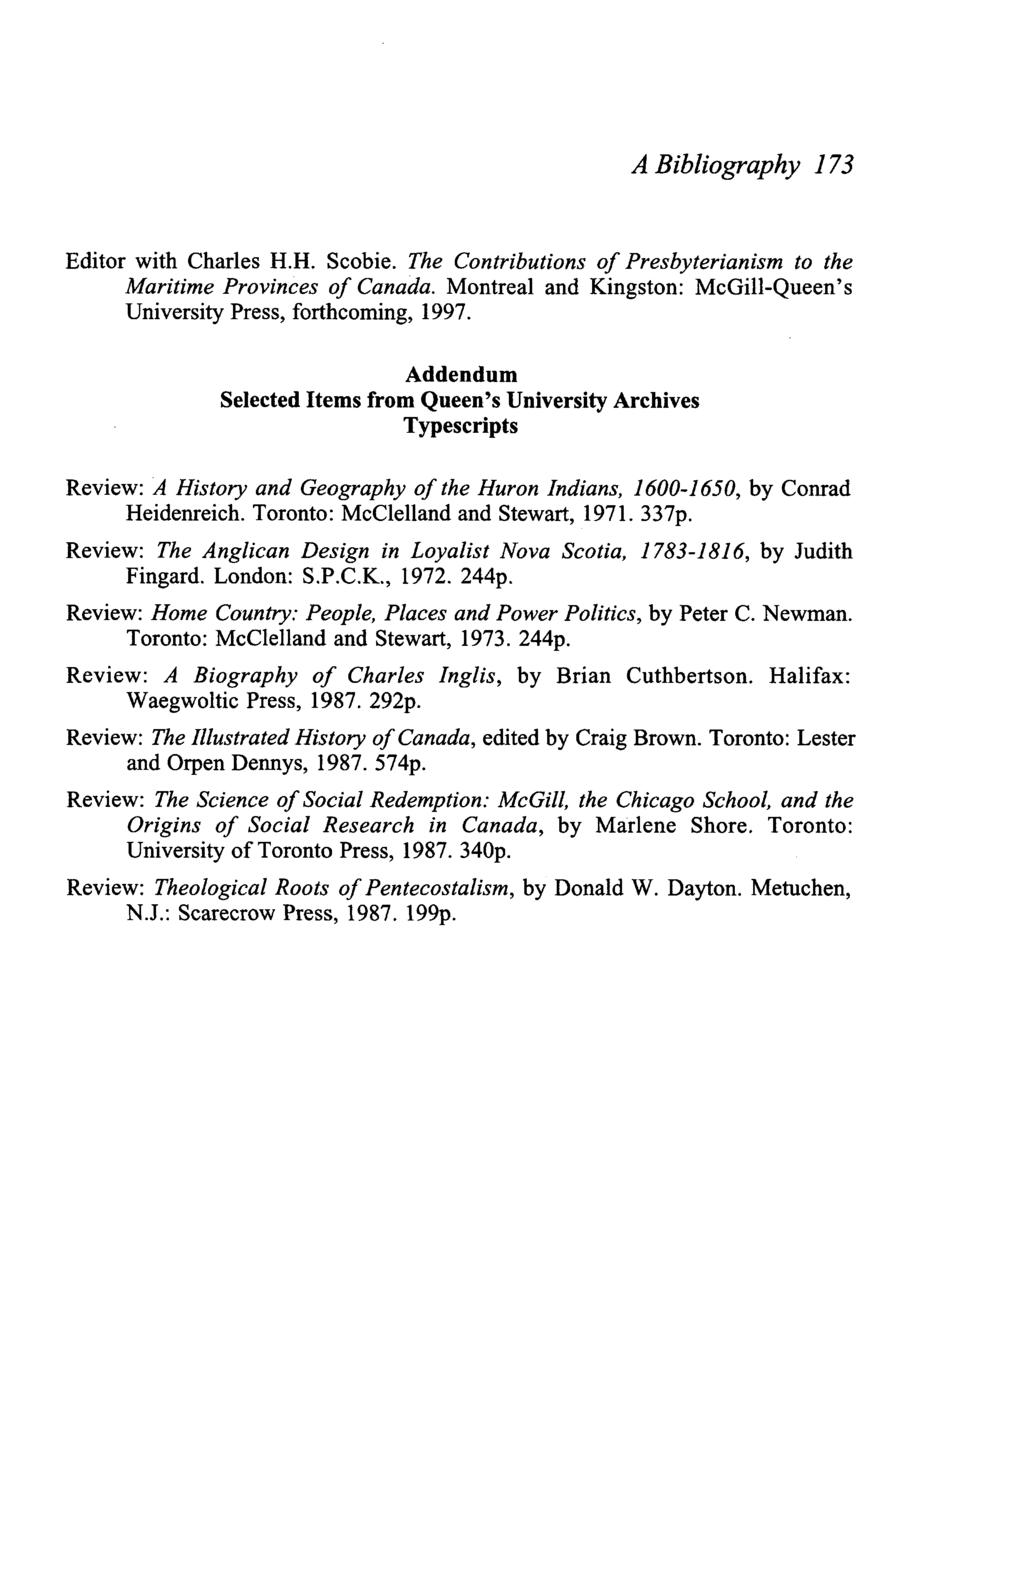 A Bibliography 173 Editor with Charles H.H. Scobie. The Contributions of Presbyterianism to the Maritime Provinces of Canada. Montreal and Kingston: McGill-Queen's University Press, forthcoming, 1997.